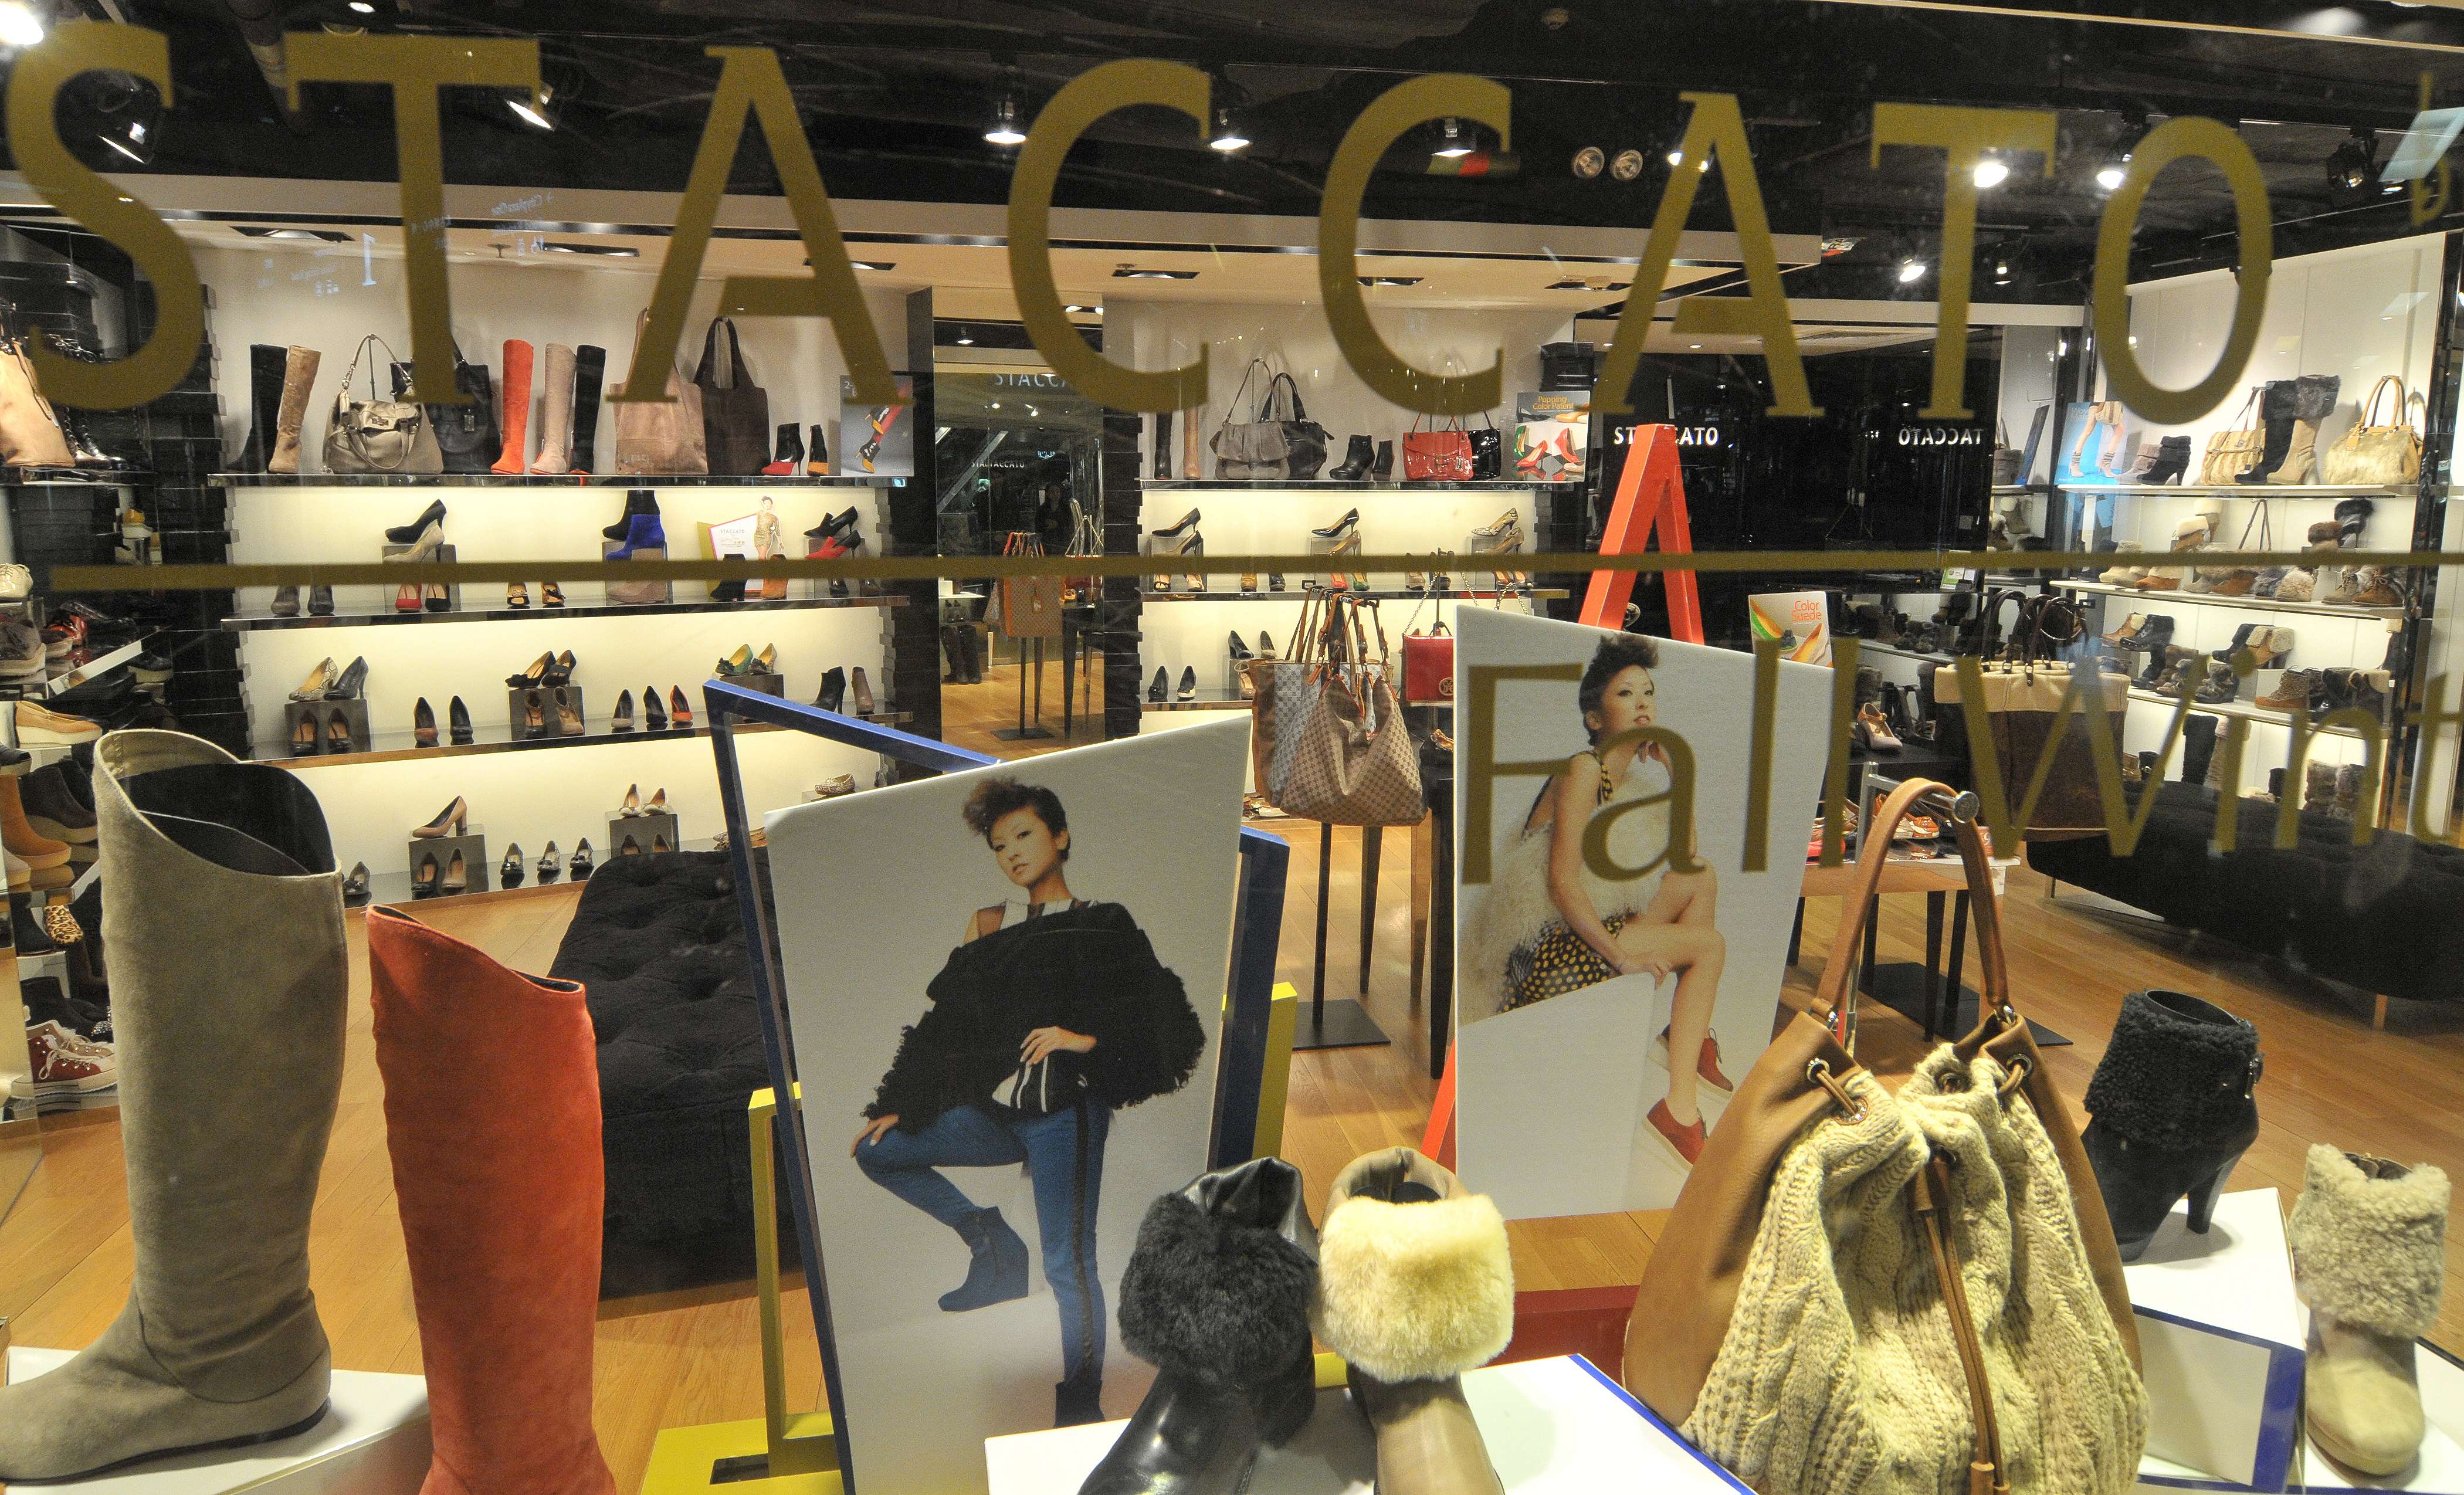 The interior of the Staccato store at the Cityplaza mall in Taikoo Shing. Staccato is among several high-profile footwear brands owned by Hong Kong-based Belle International which, along with Shenzhou International, scored the lowest in a recent ranking on steps taken to eradicate forced labour from supply chains. Photo: Thomas Yau